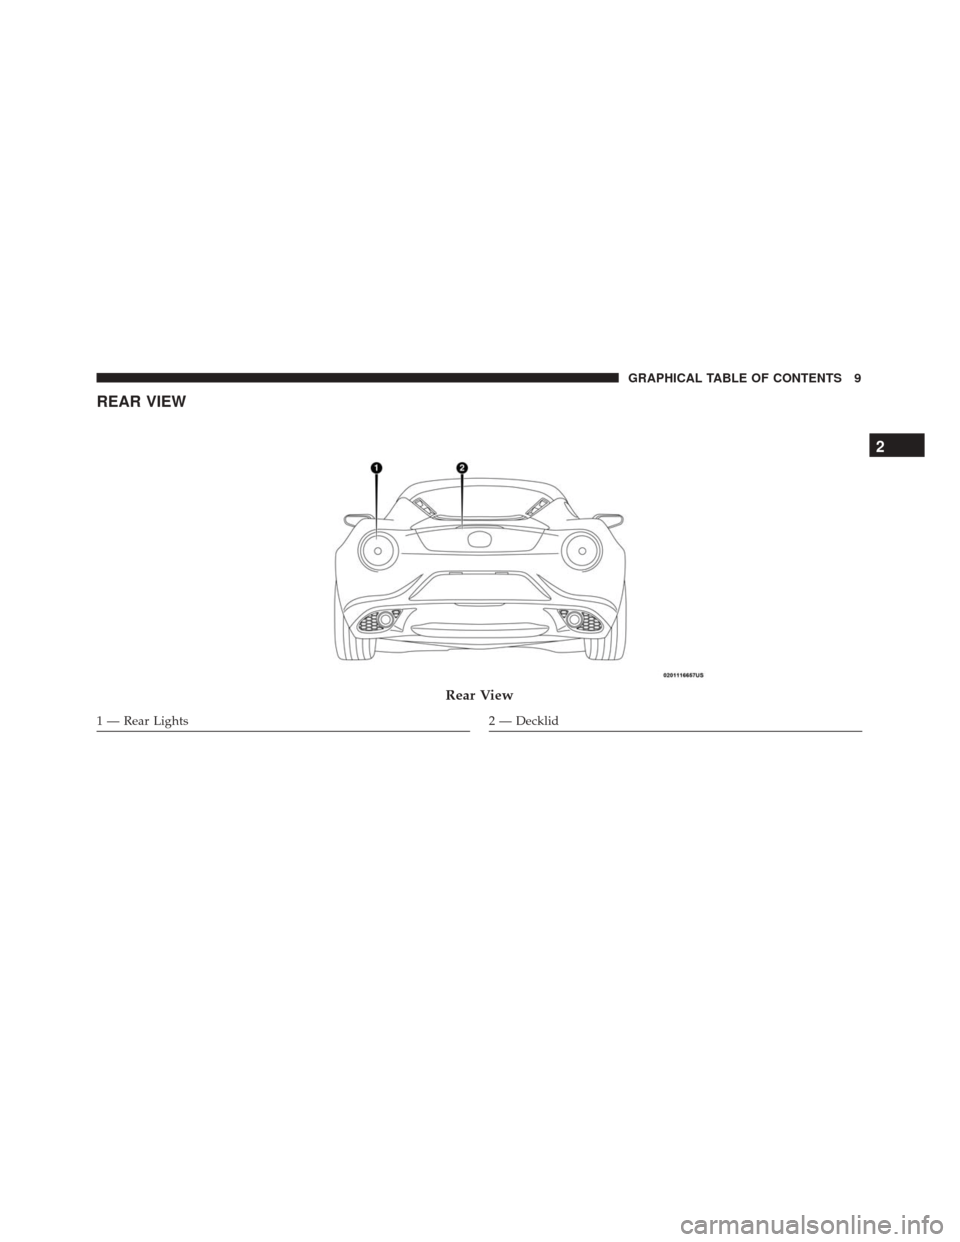 Alfa Romeo 4C 2018 User Guide REAR VIEW
Rear View
1 — Rear Lights2 — Decklid
2
GRAPHICAL TABLE OF CONTENTS 9 